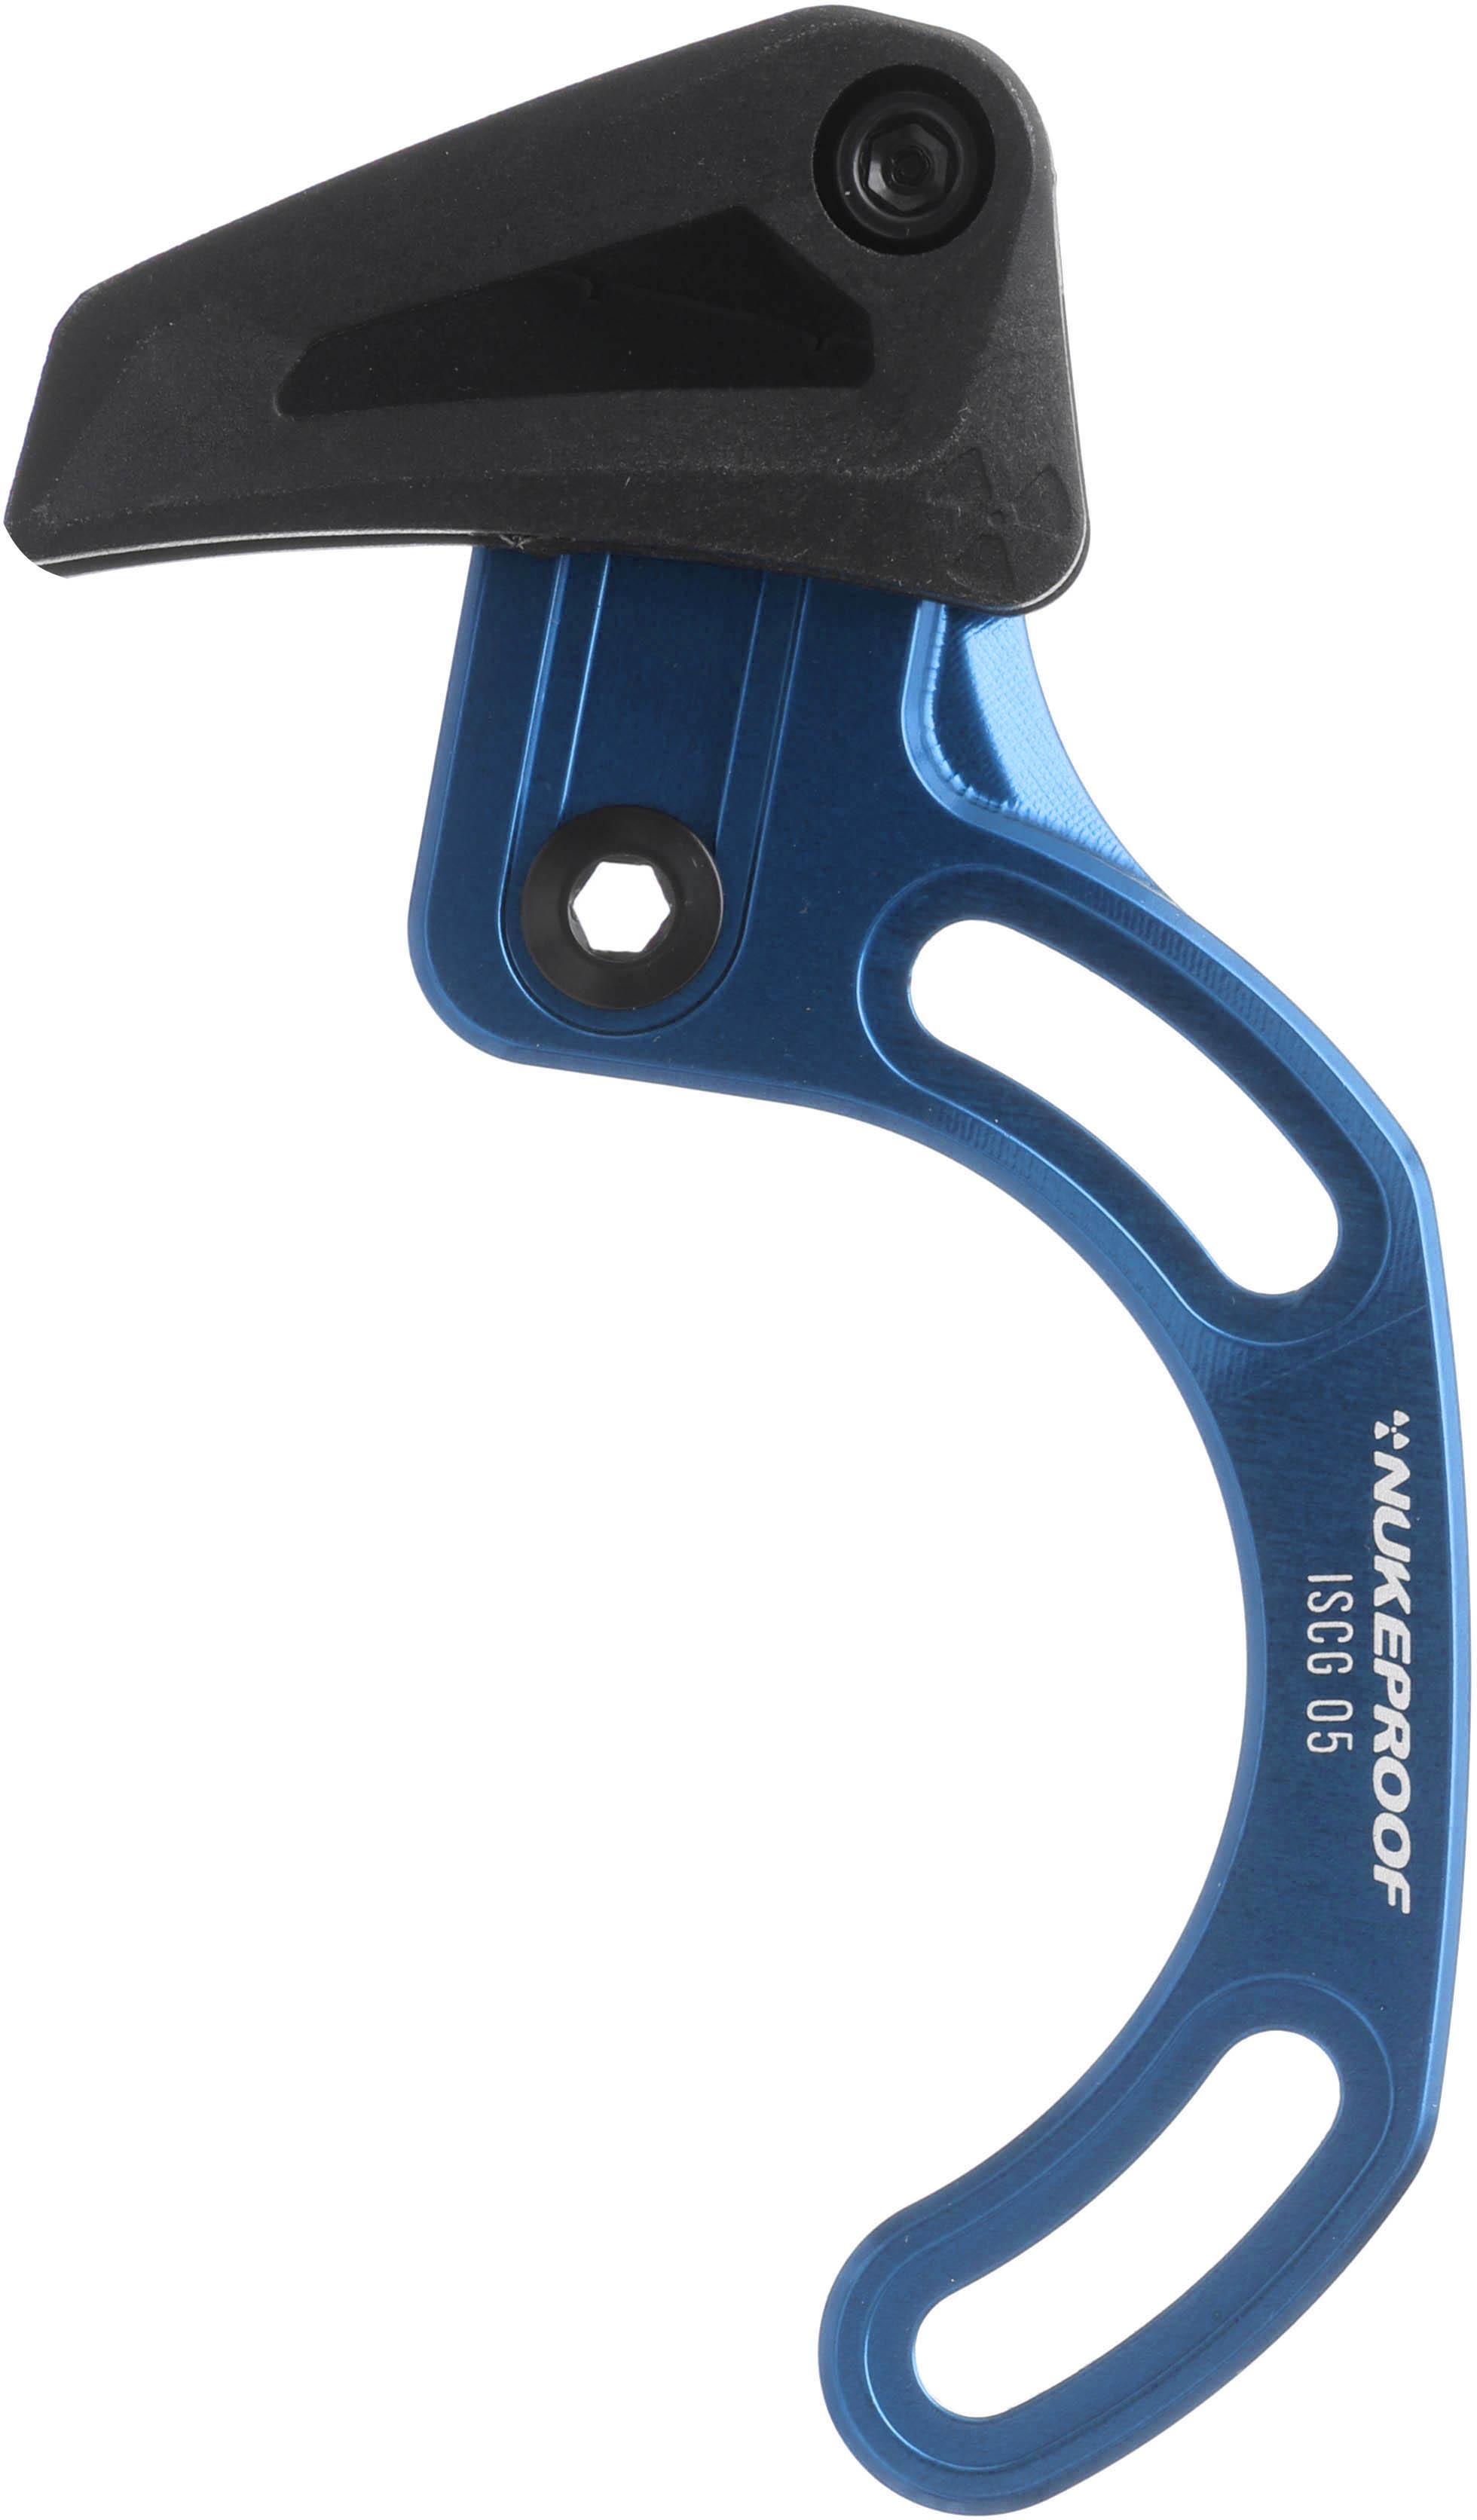 Nukeproof Chain Guide Iscg 05 Top Guide - Blue/black